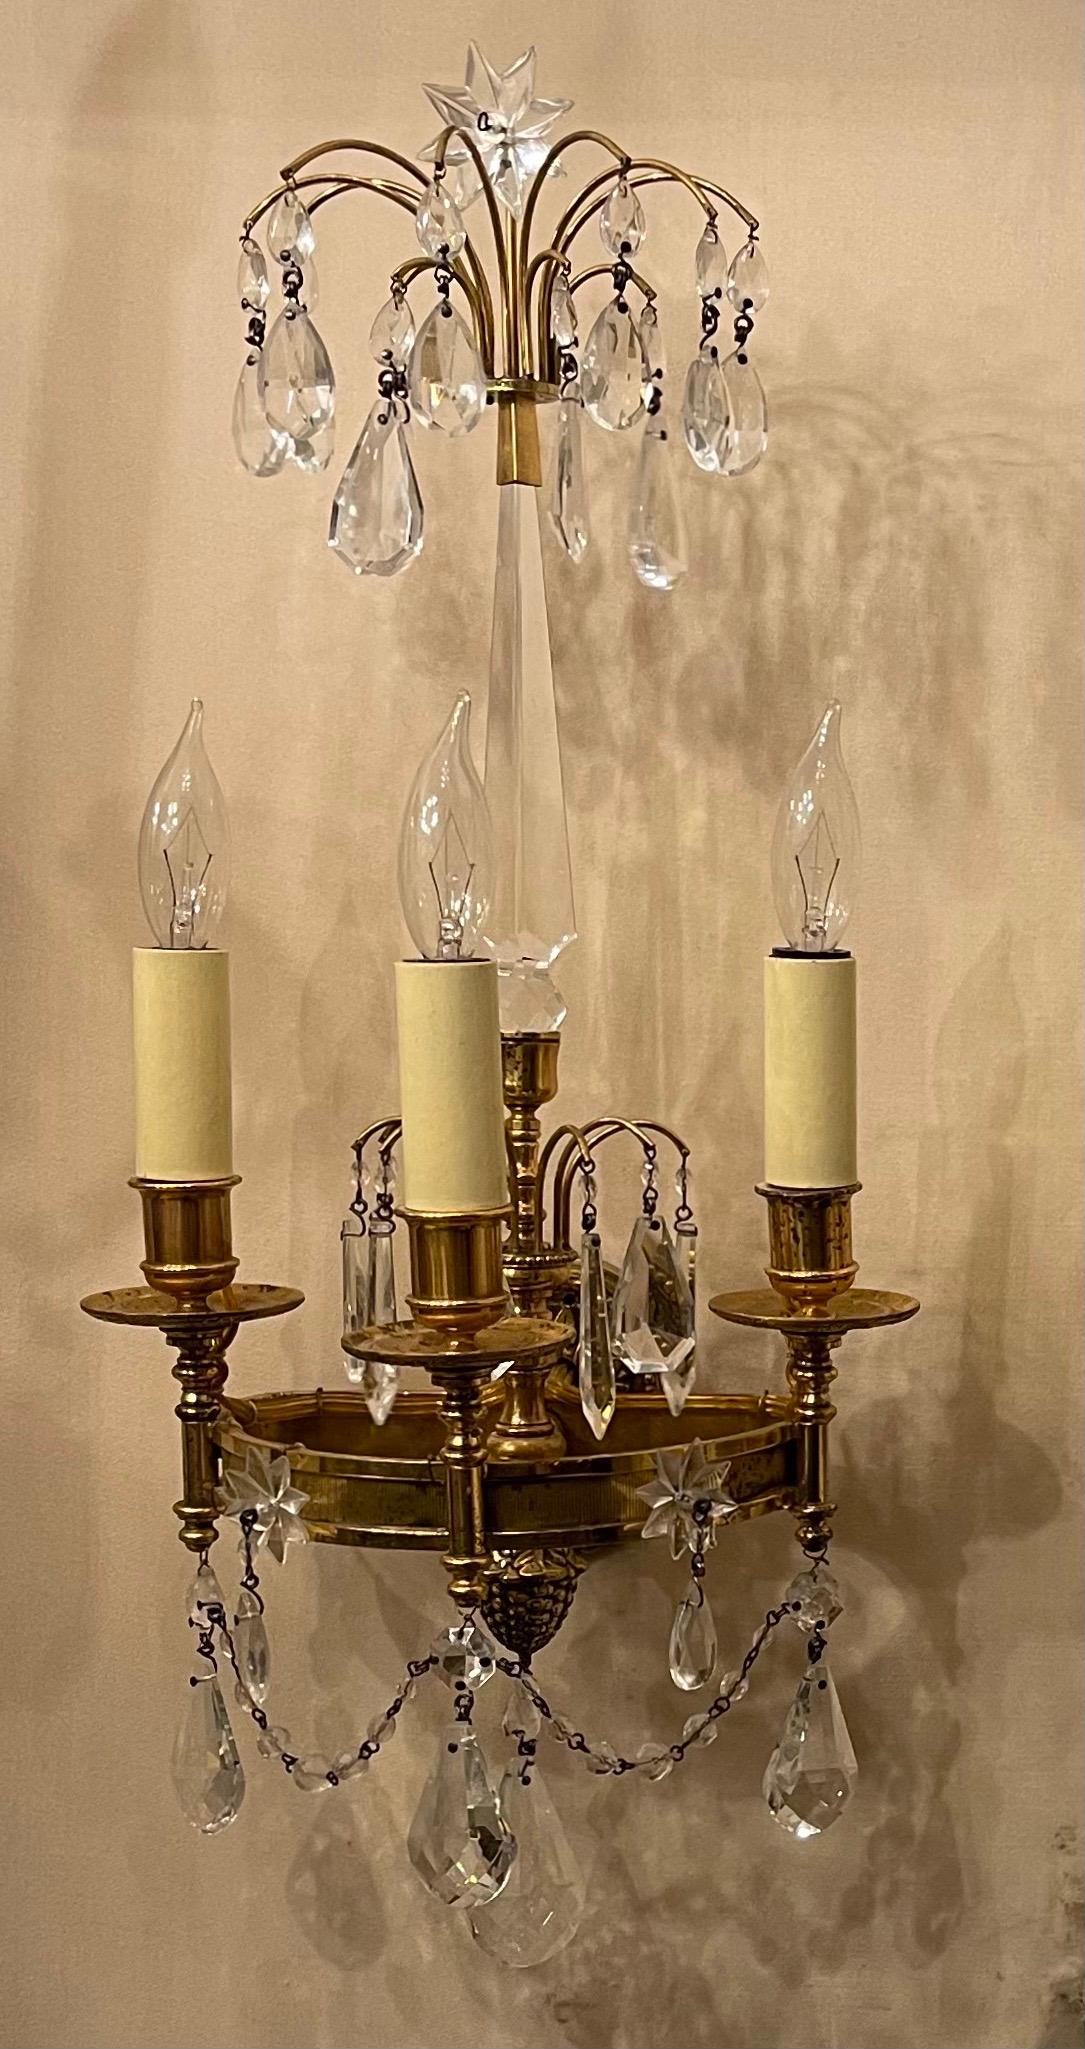 A wonderful pair of neoclassical, regency, empire, Baltic dore bronze & crystal sconces with crystal center spike leading to a cluster bouquet.
 